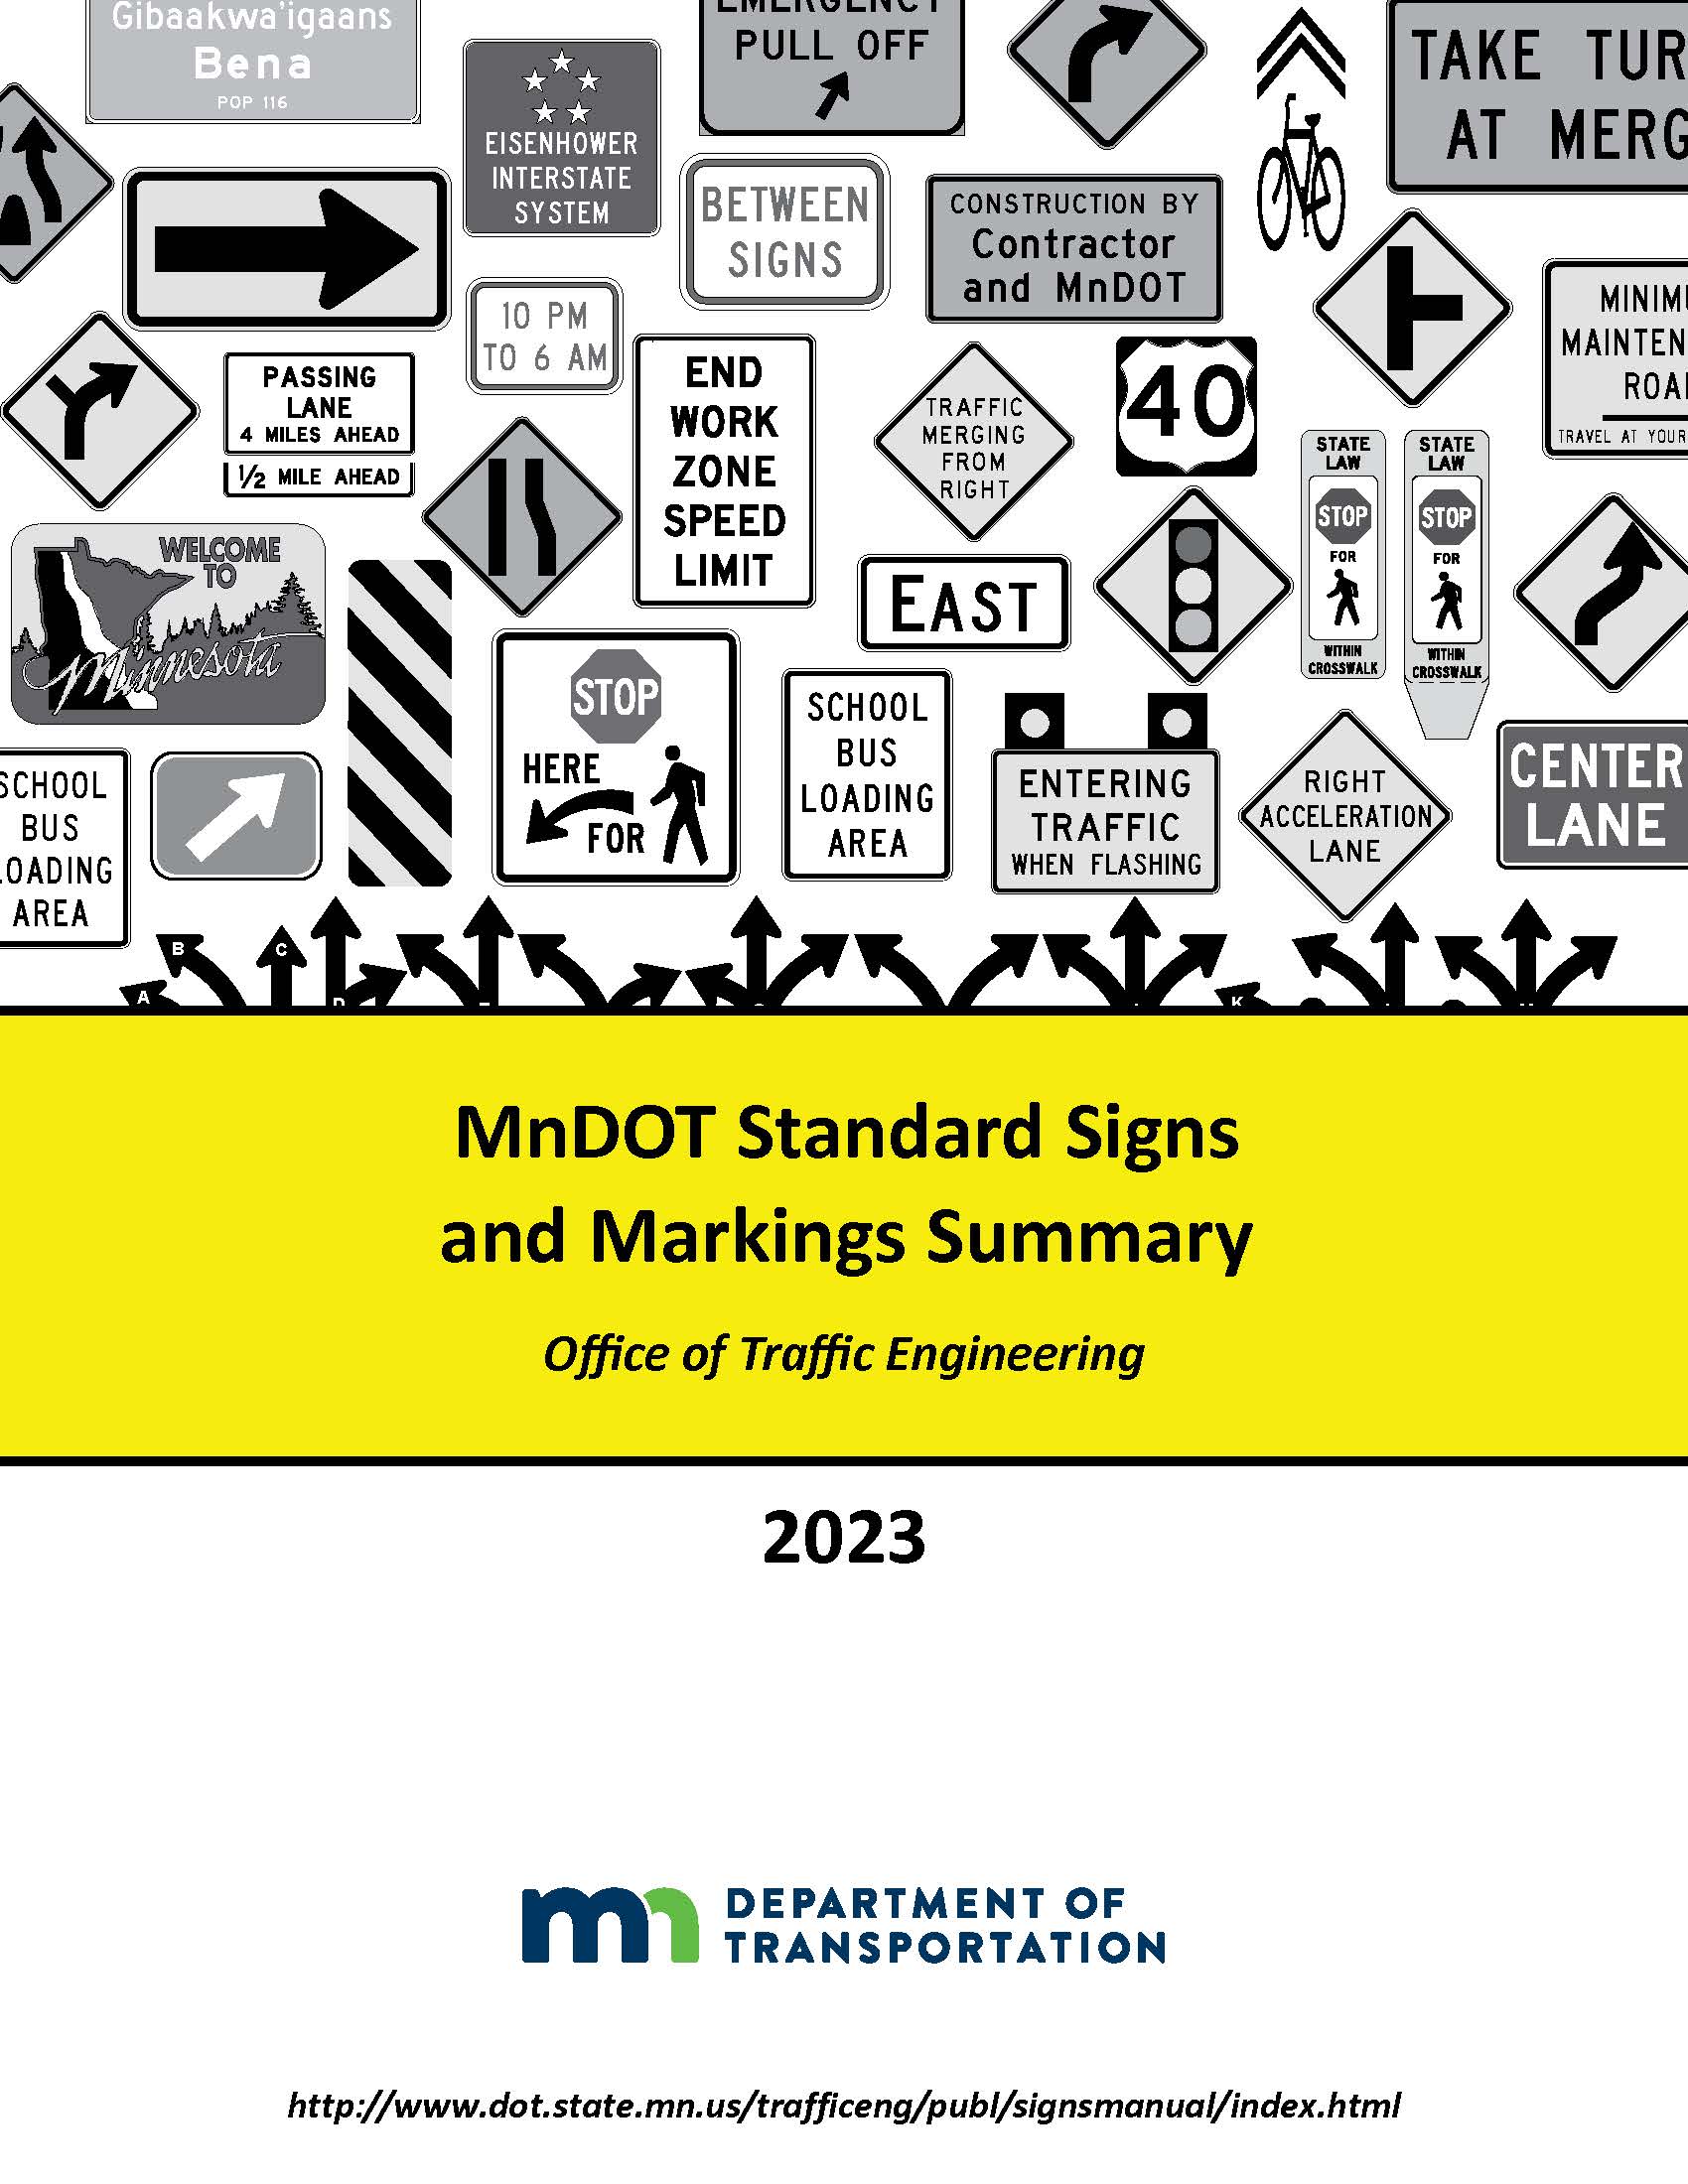 standard signs and markings summary manual